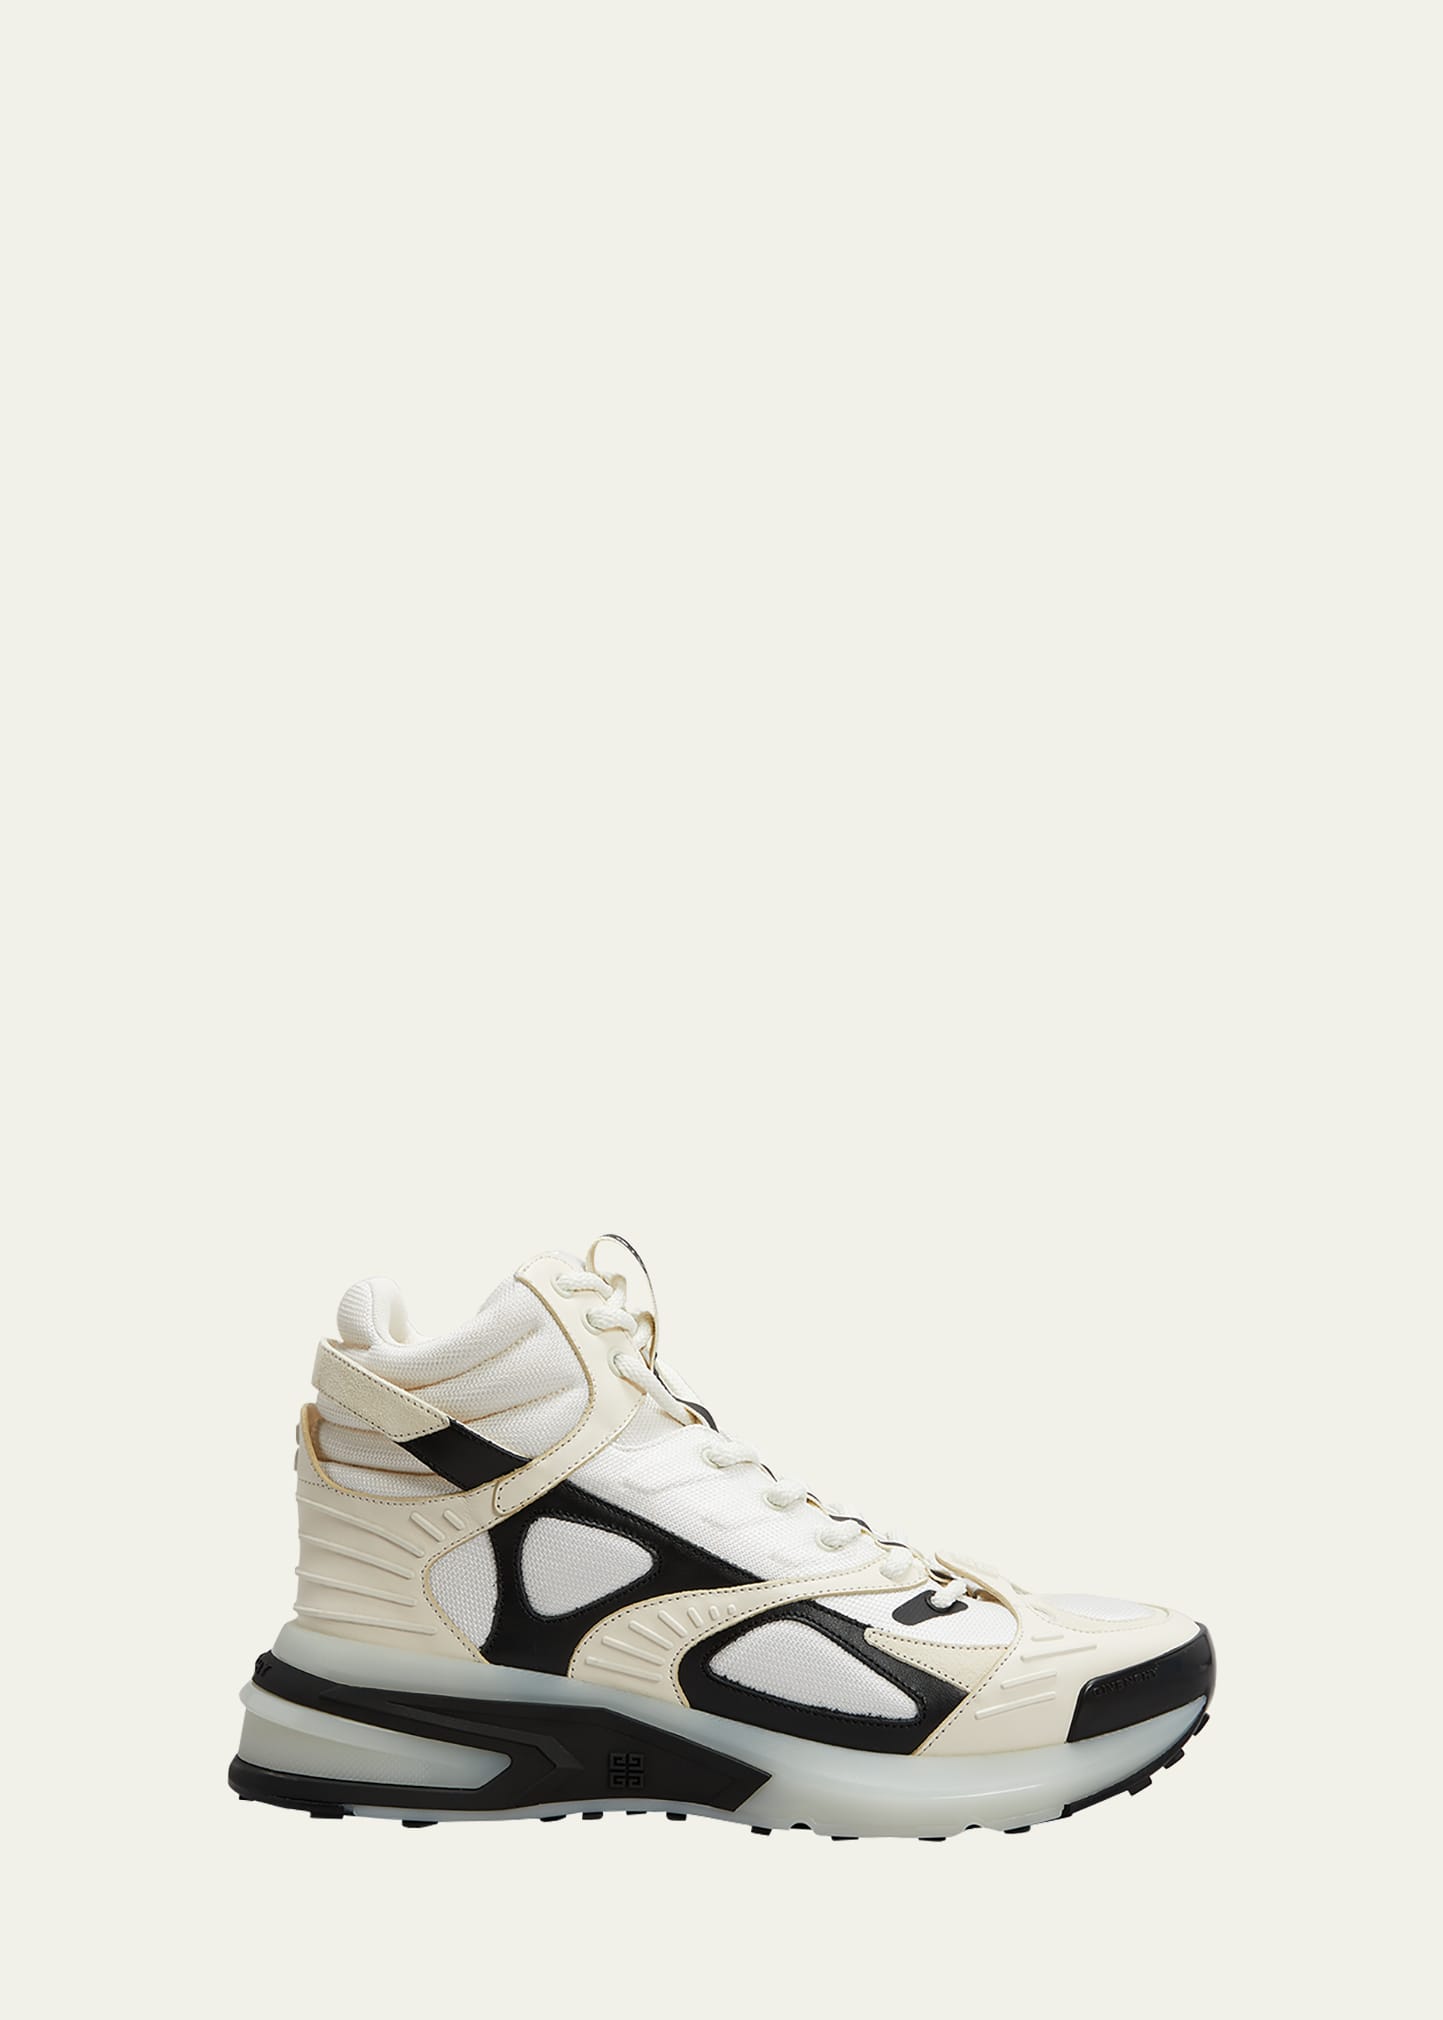 Givenchy Men's GIV 1 Clear-Sole Mesh High-Top Sneakers